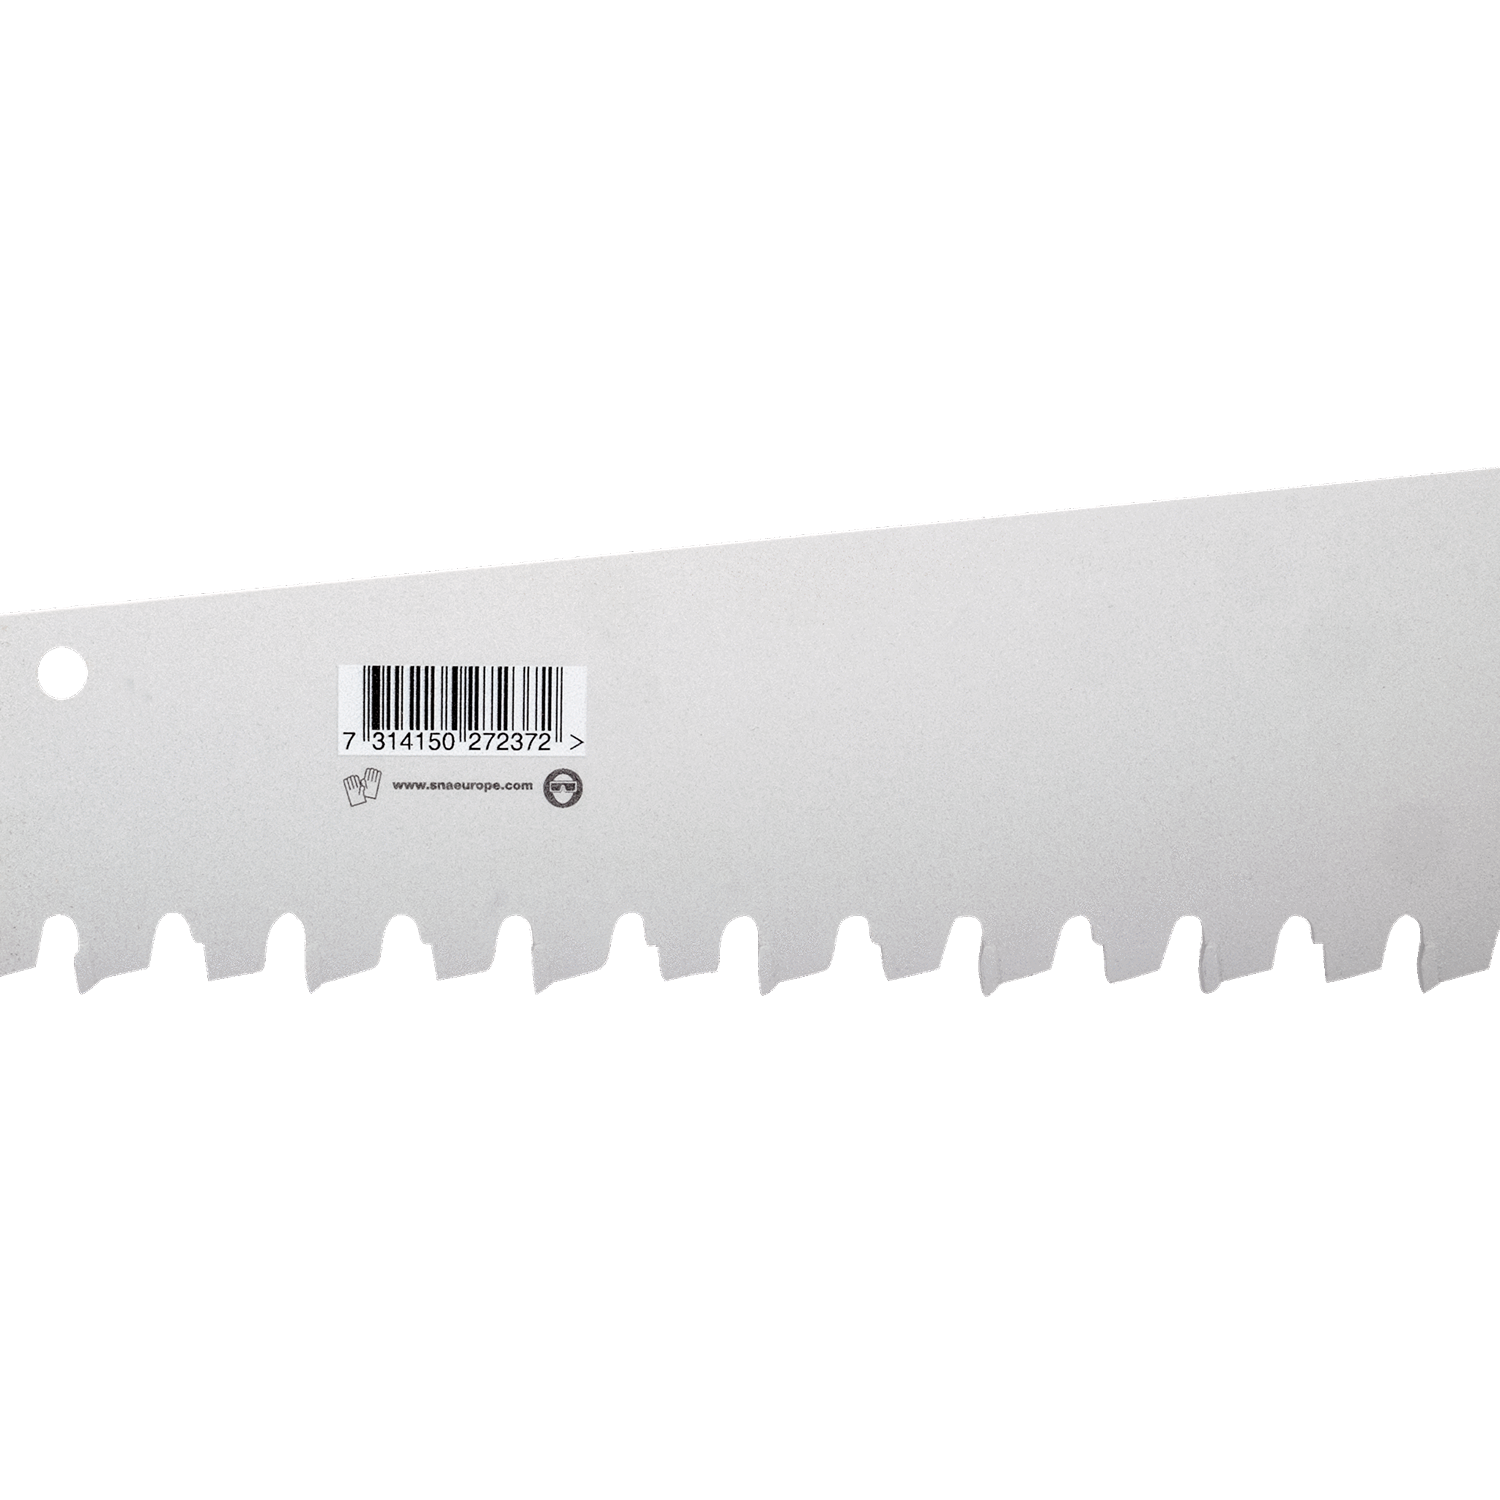 BAHCO 255-17/34 ProfCut Handsaw for Lightweight Concrete - 0.6" - Premium Handsaw from BAHCO - Shop now at Yew Aik.